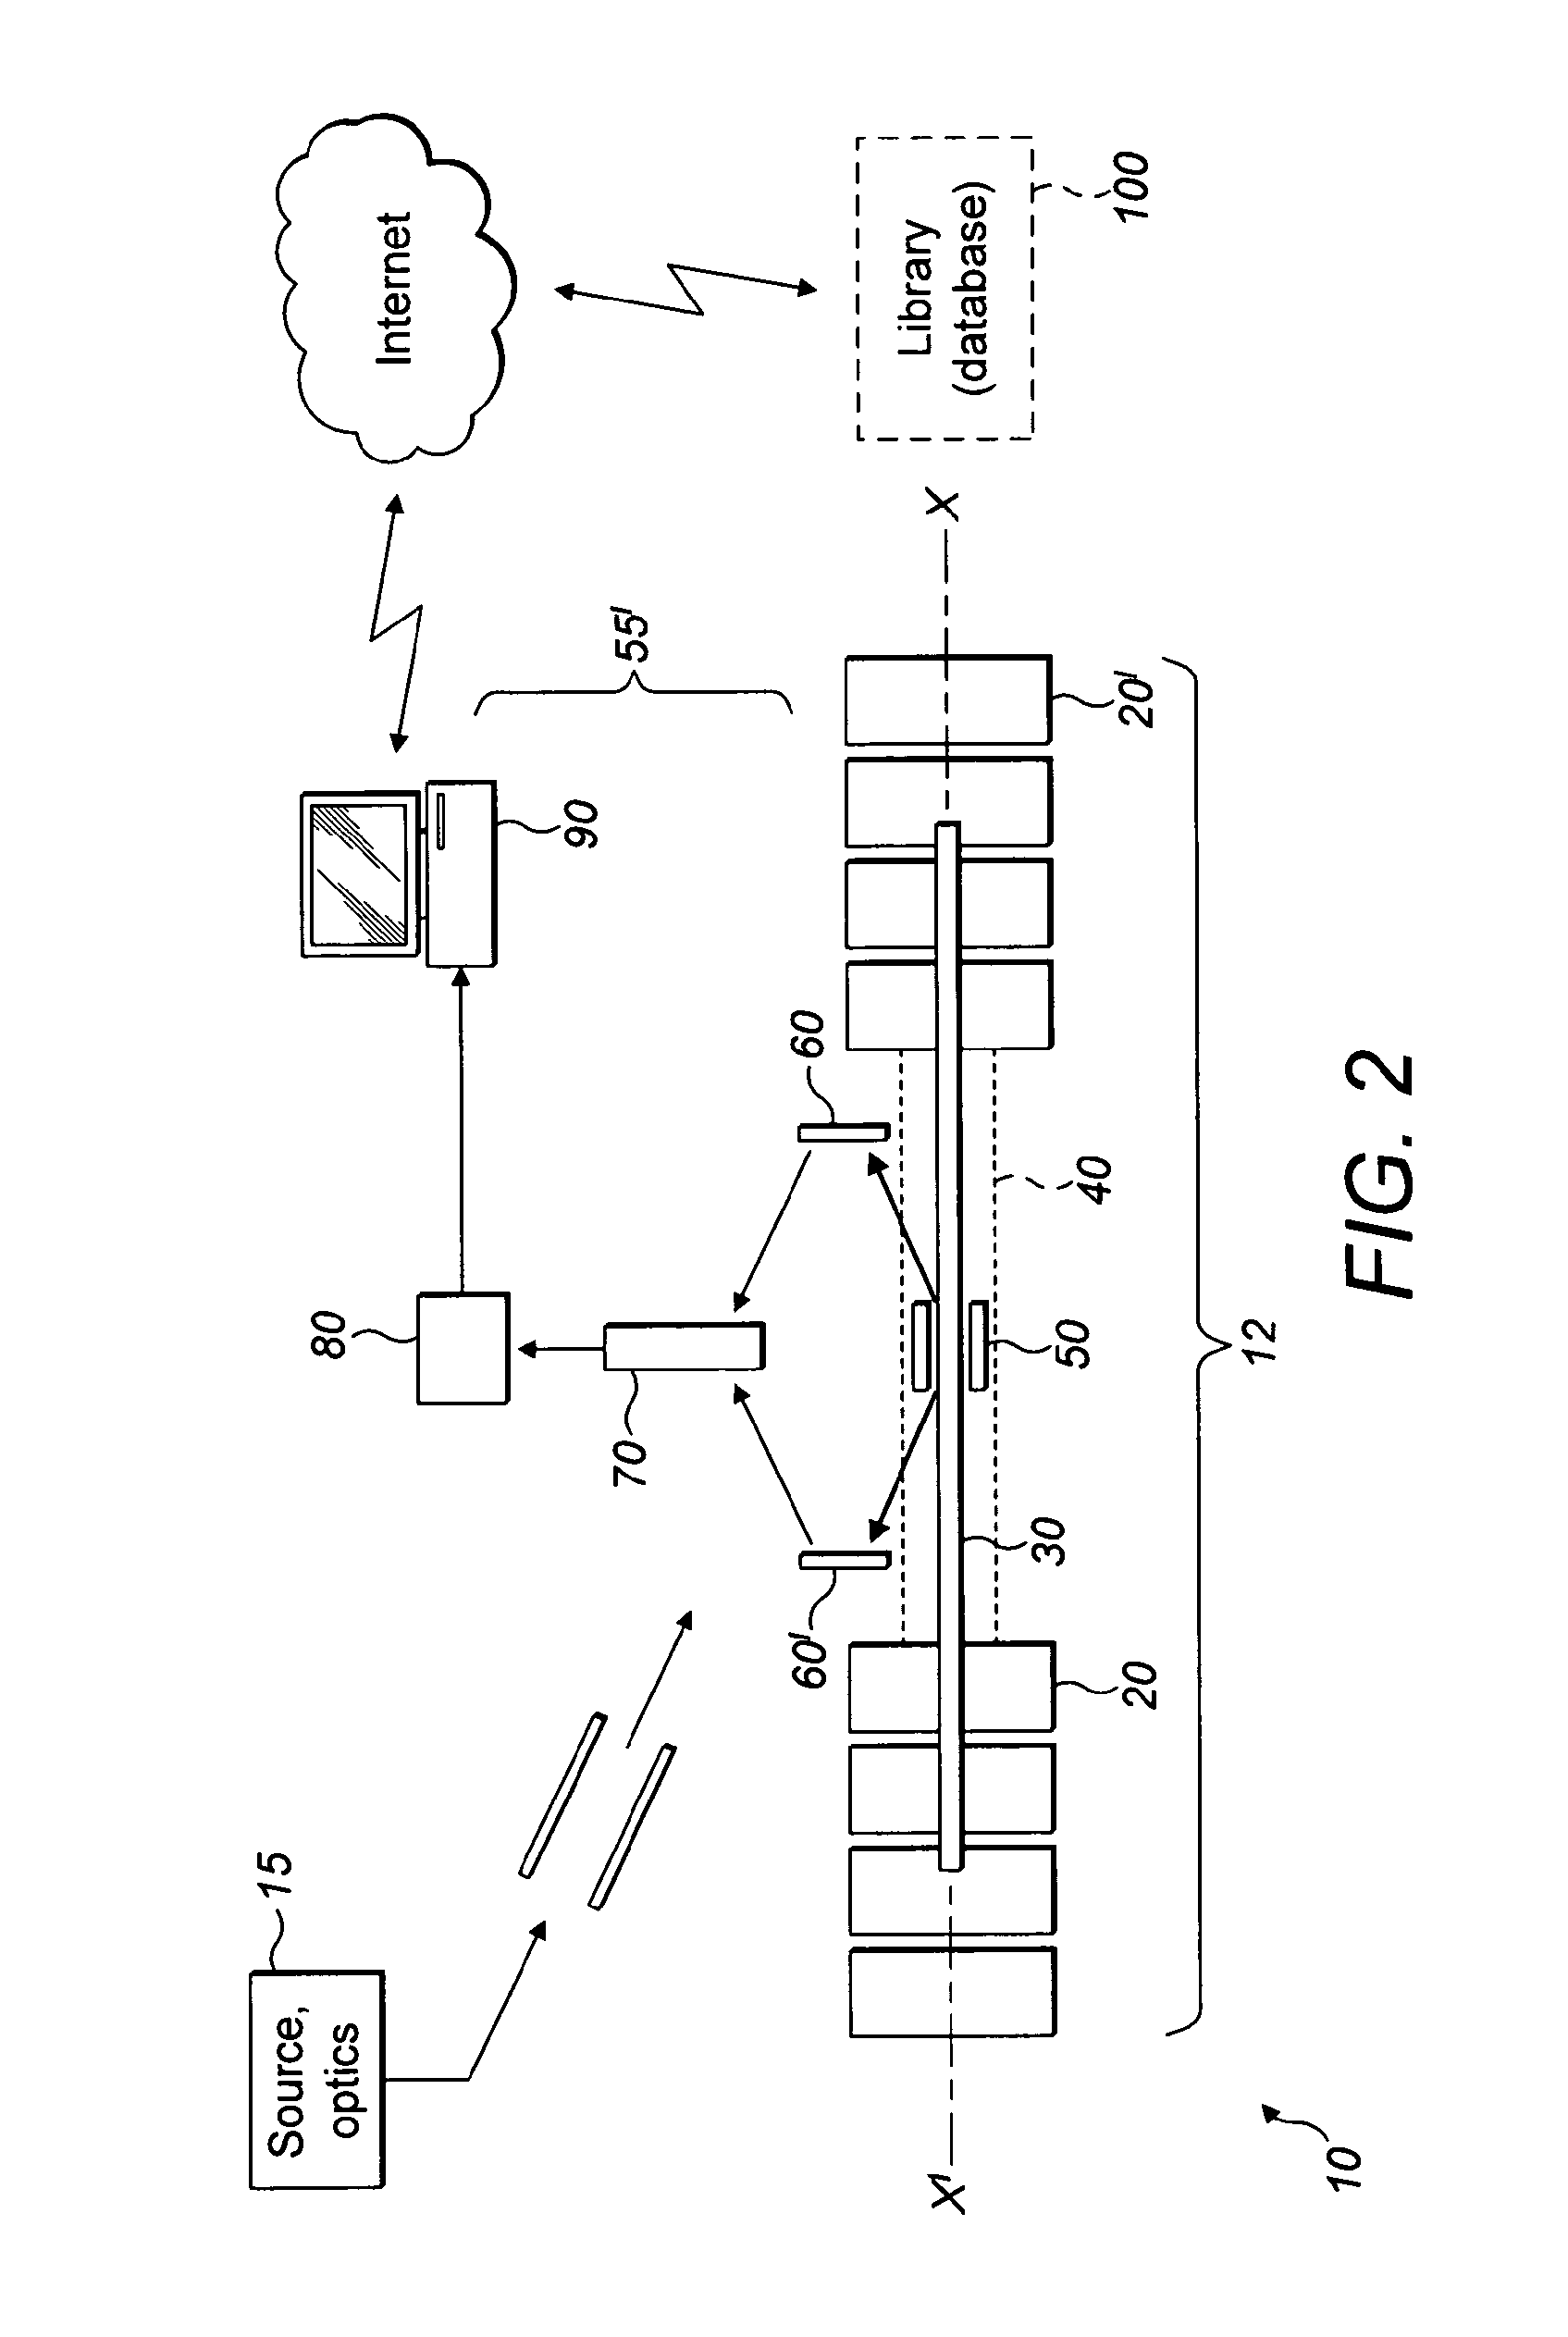 Method of multi-reflecting timeof flight mass spectrometry with spectral peaks arranged in order of ion ejection from the mass spectrometer